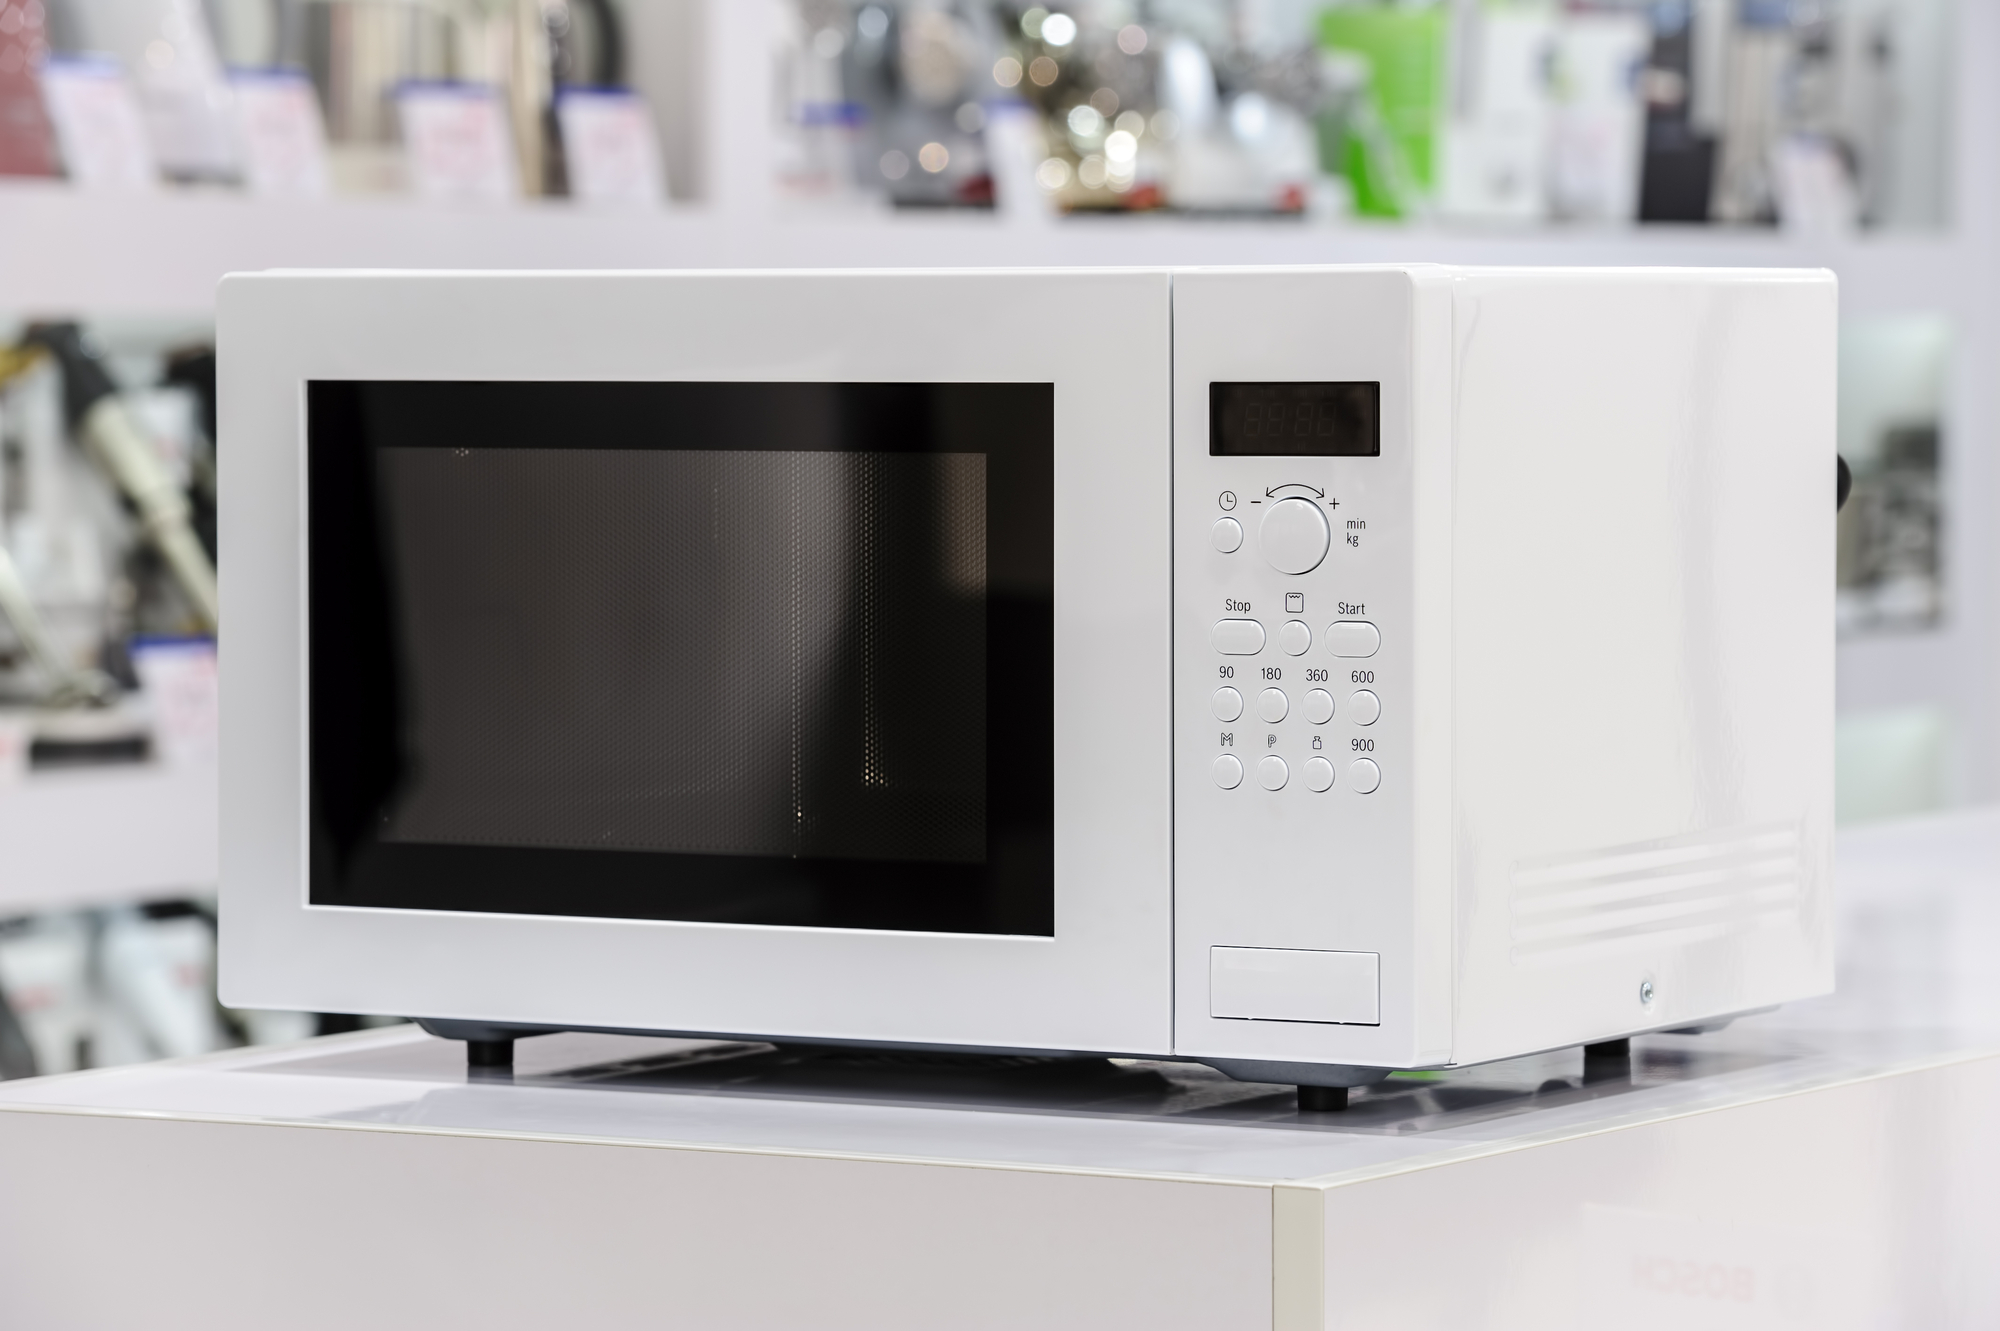 single white microwave oven at retail store shelf, defocused background